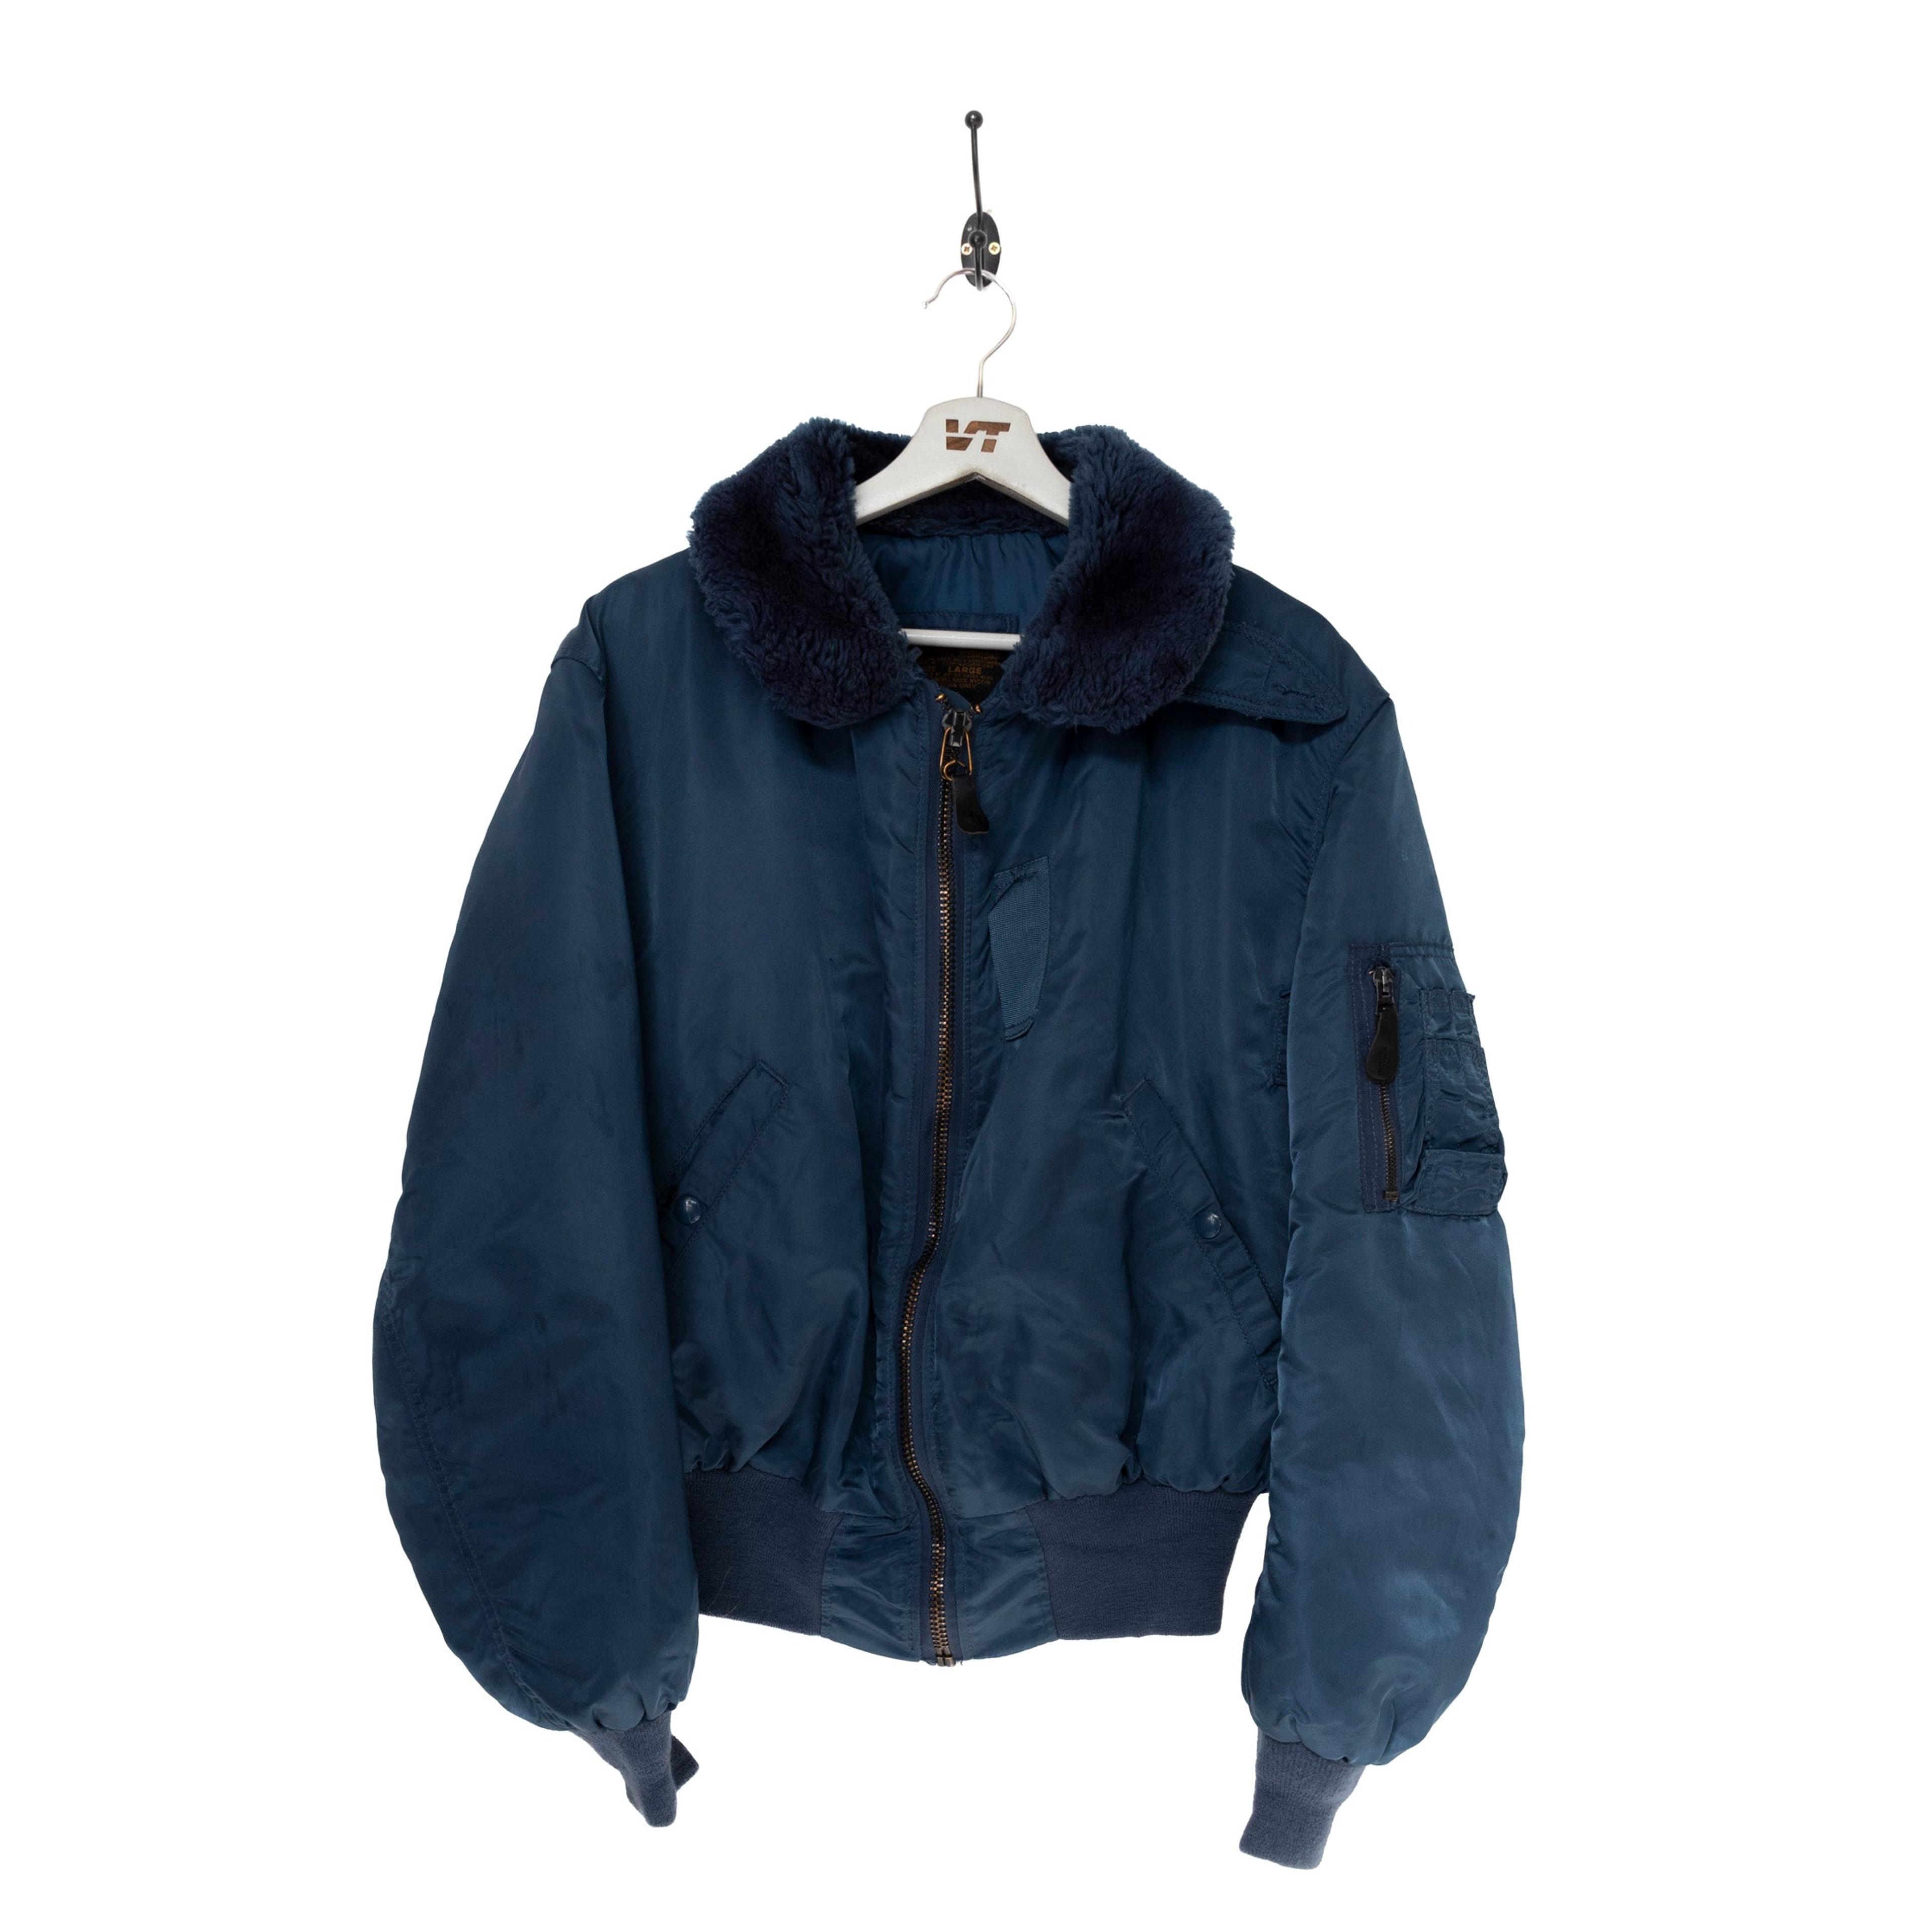 Avirex Air Force Blue Shearling Bomber Jacket